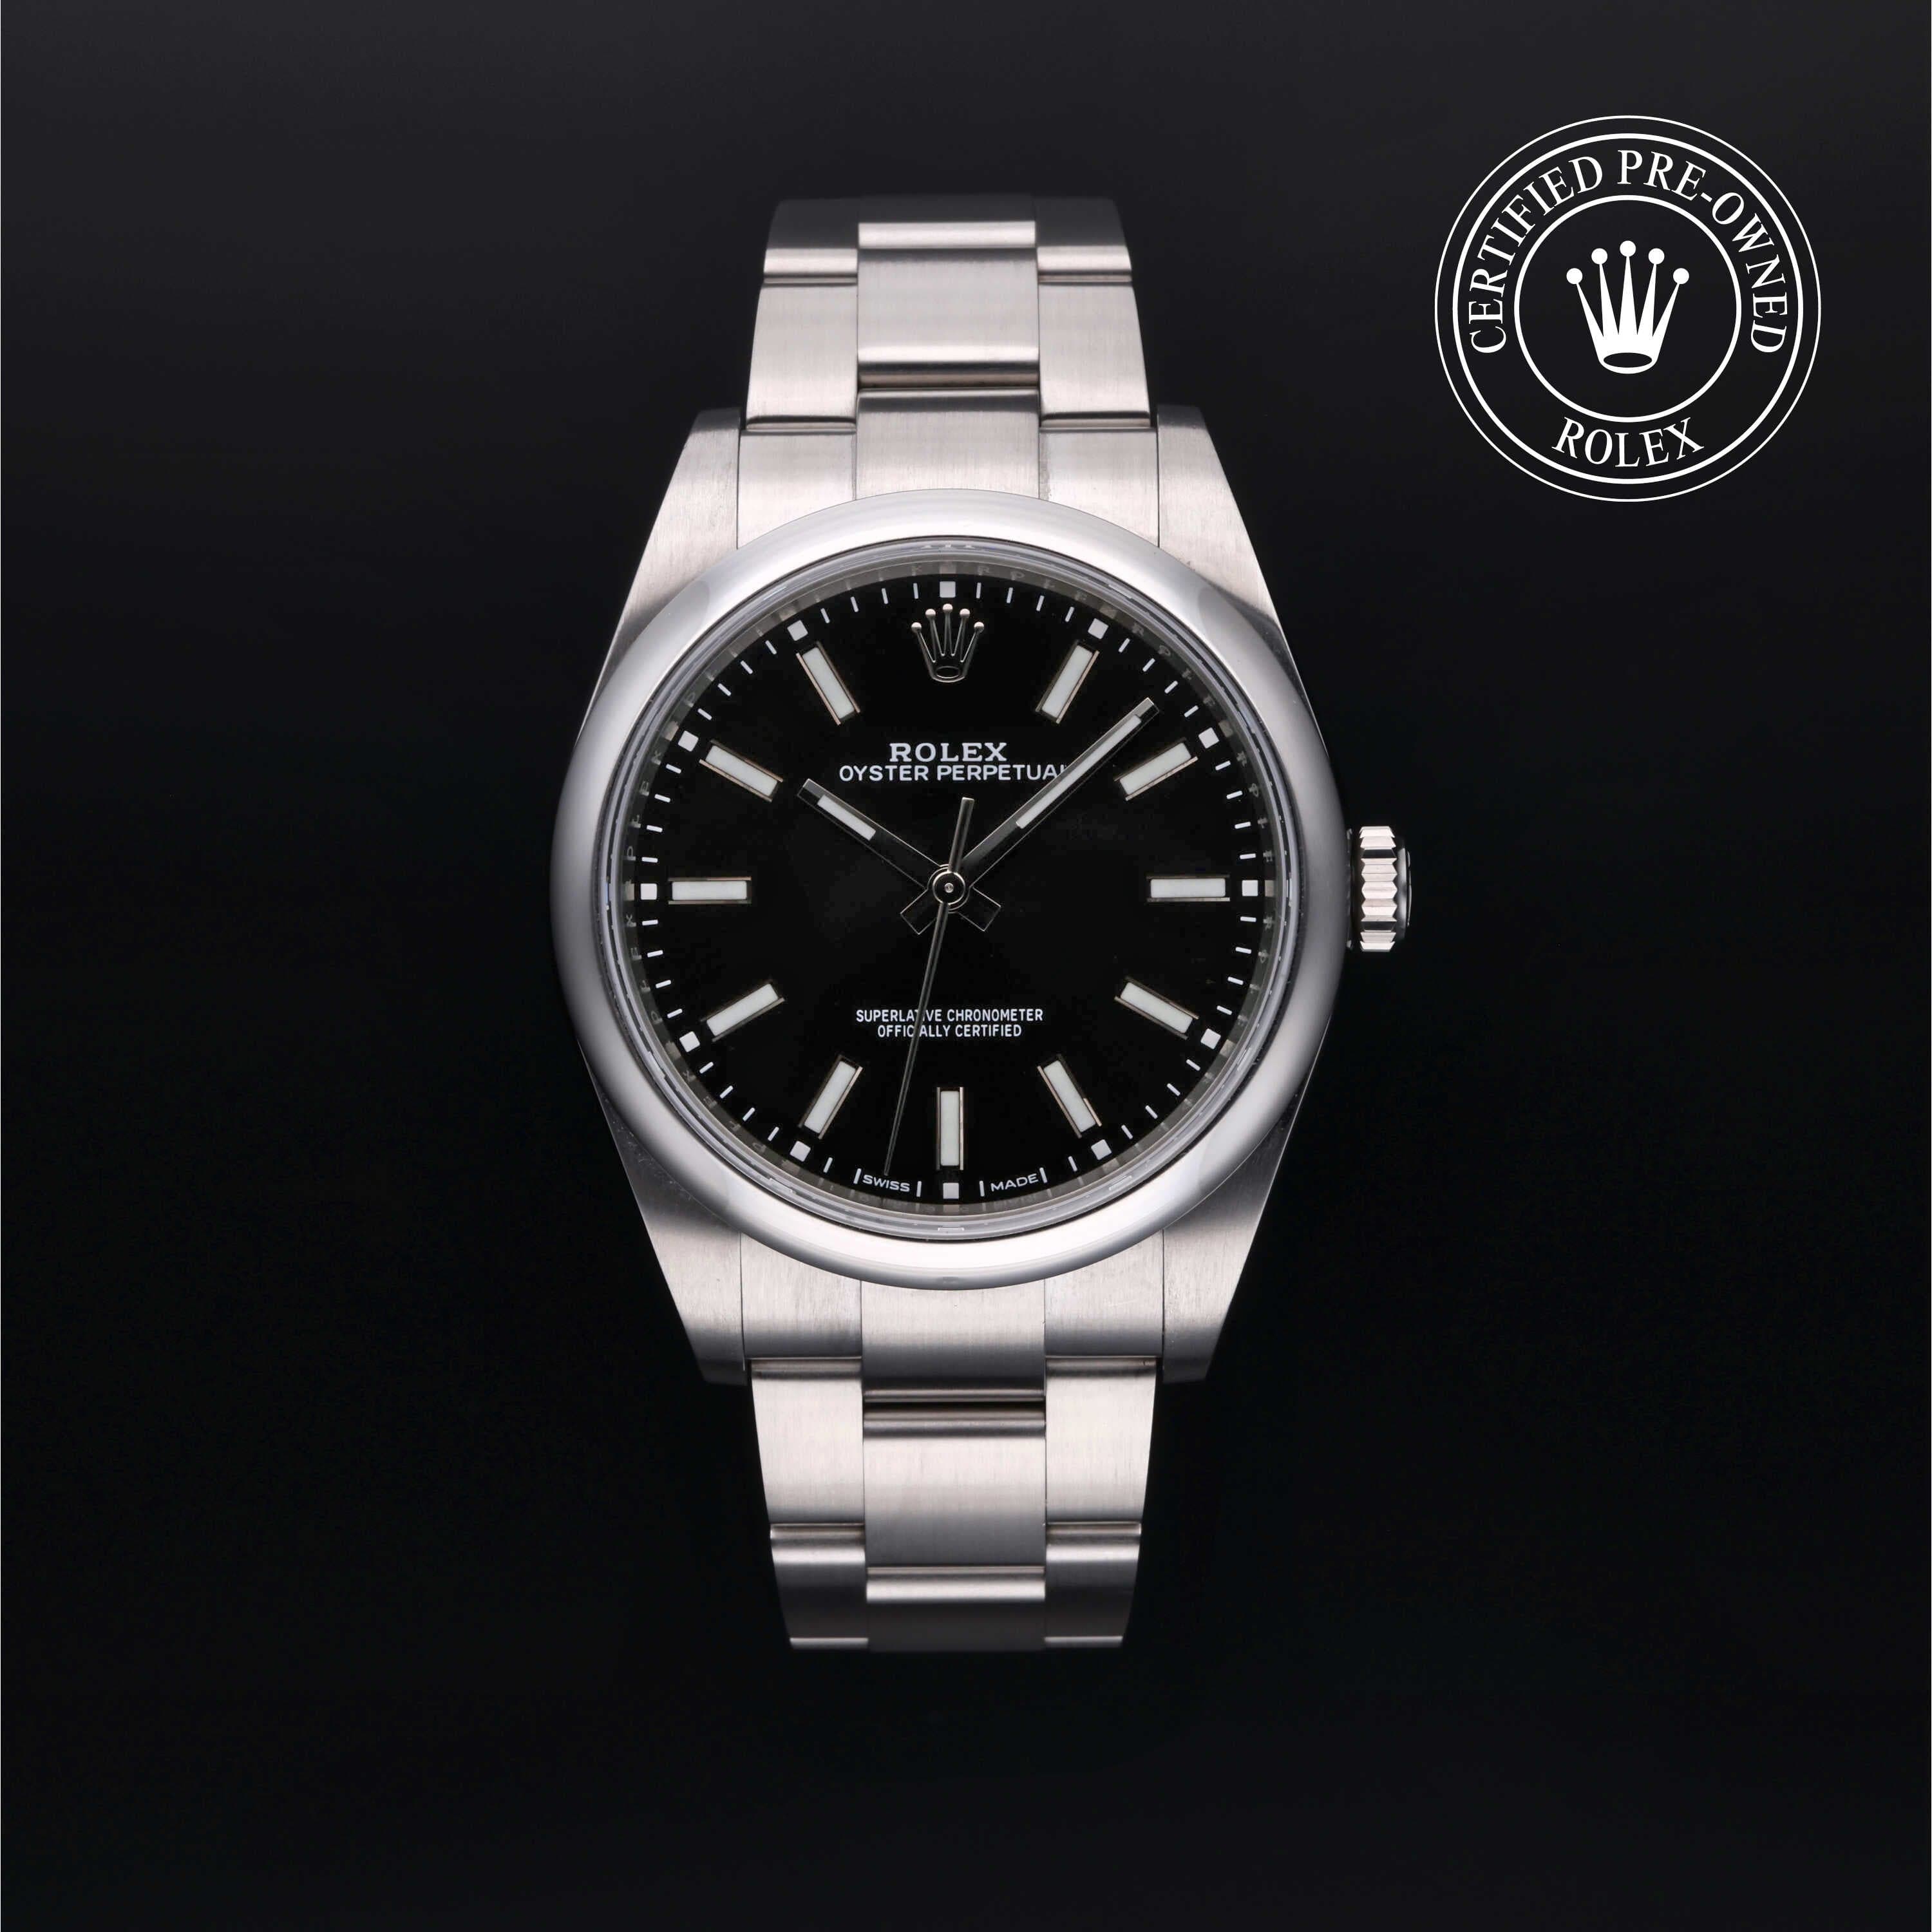 Rolex Certified Pre-Owned Oyster Perpetual in Oyster, 39 mm, Stainless Steel 114300 watch available at Long's Jewelers.